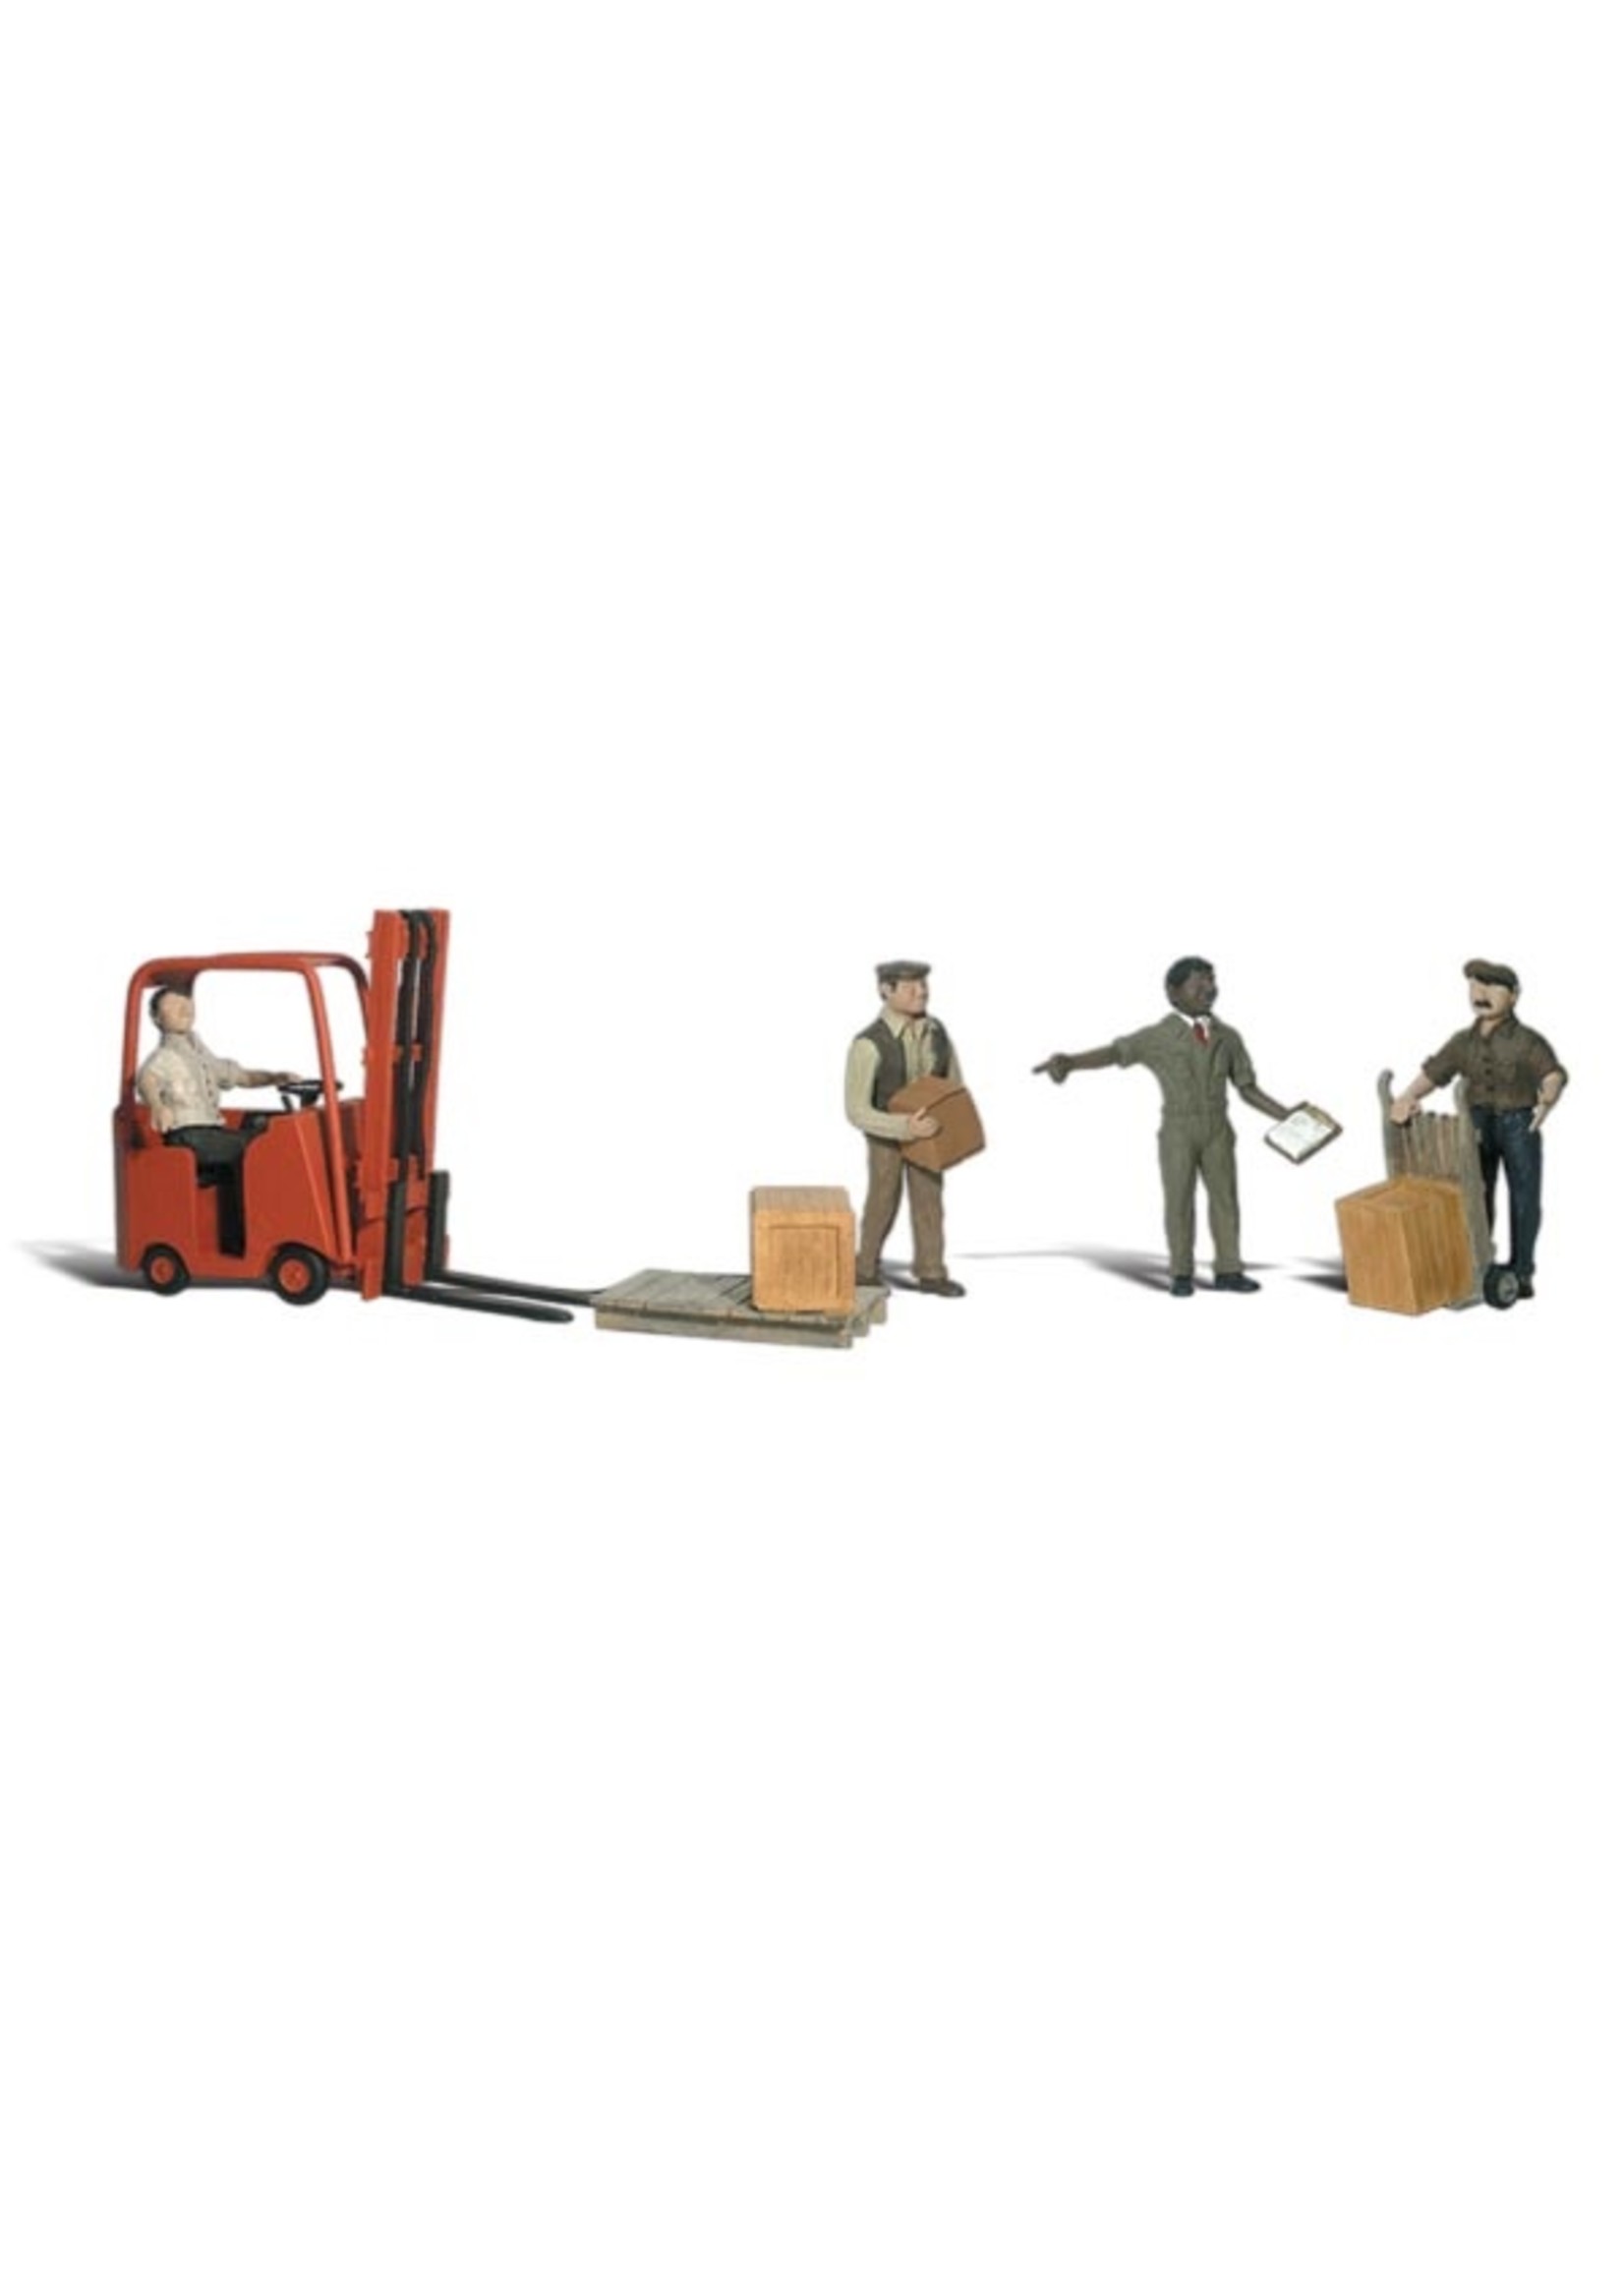 Woodland Scenics A2192 - N Scale Workers with Forklift